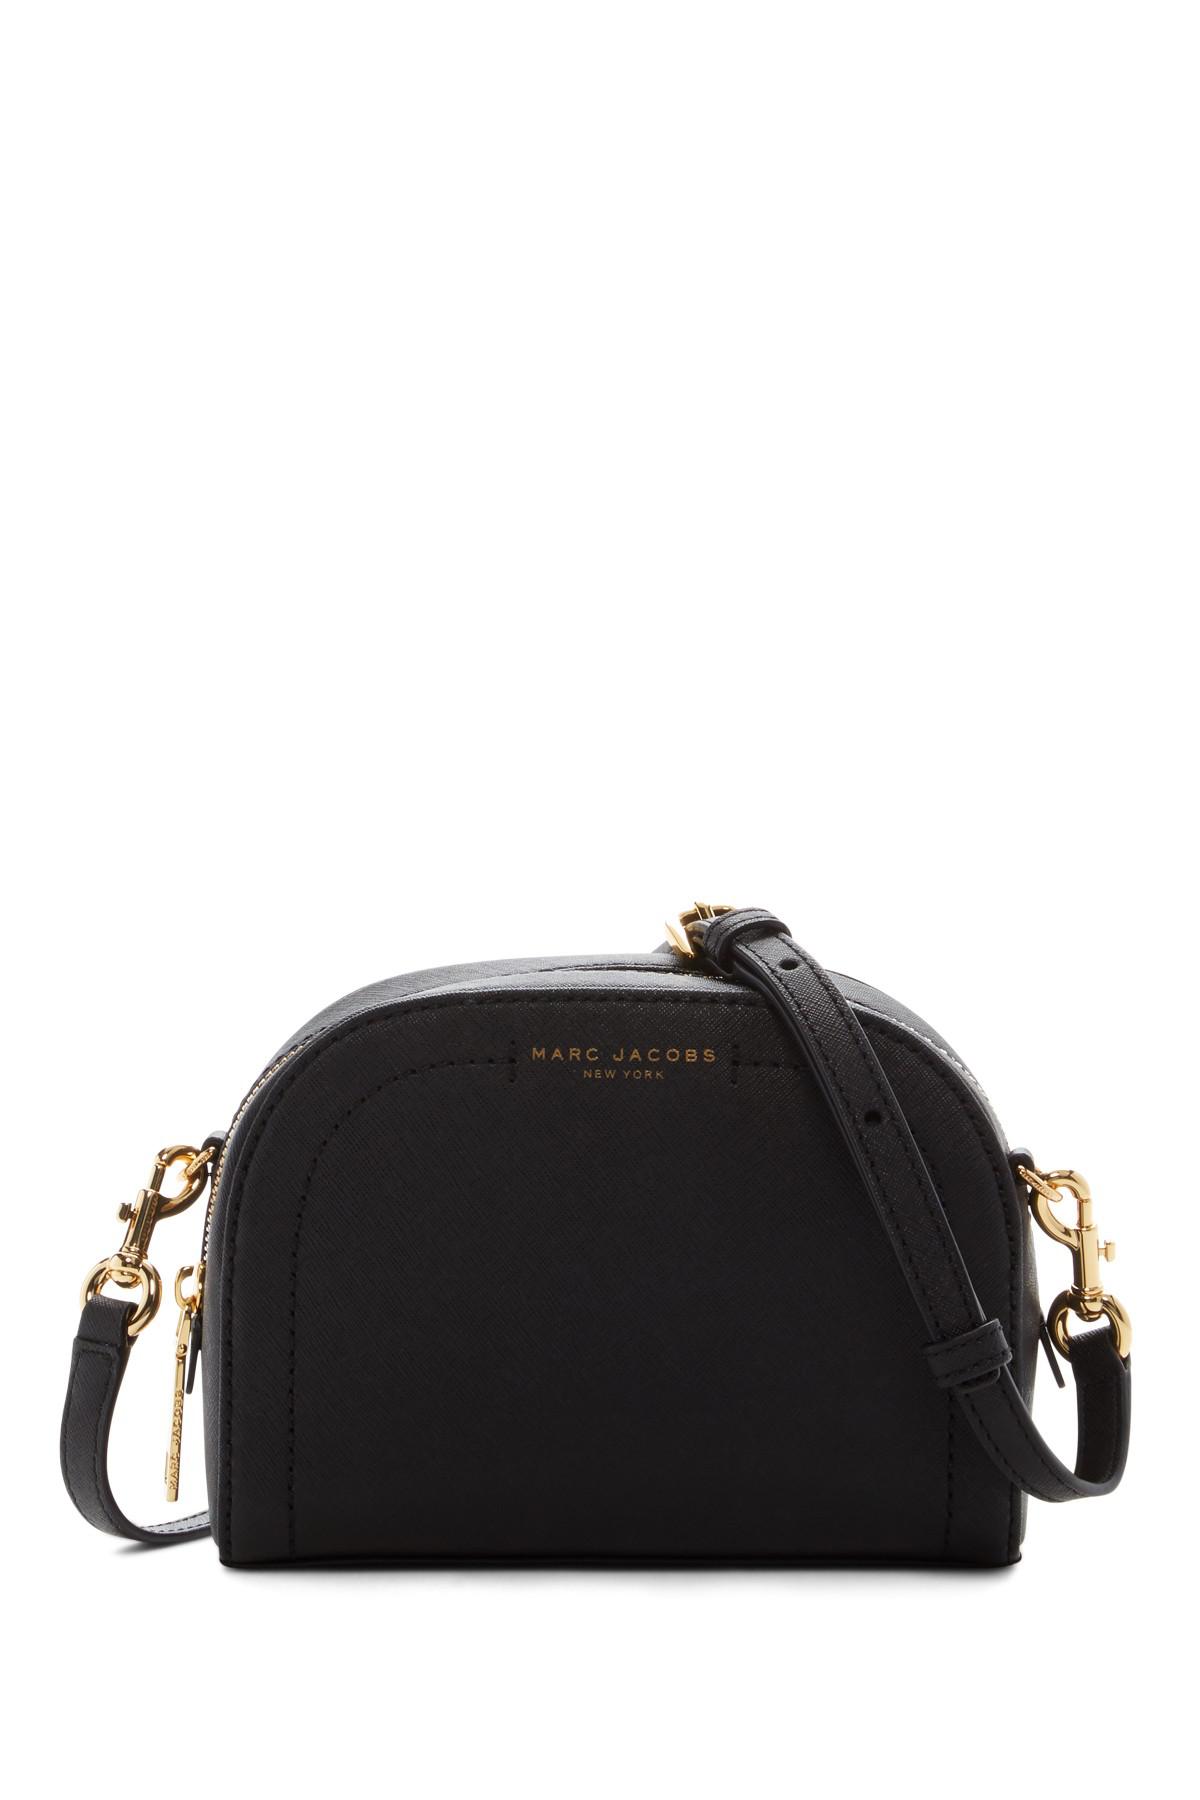 Lyst - Marc Jacobs Playback Leather Crossbody Bag in Black